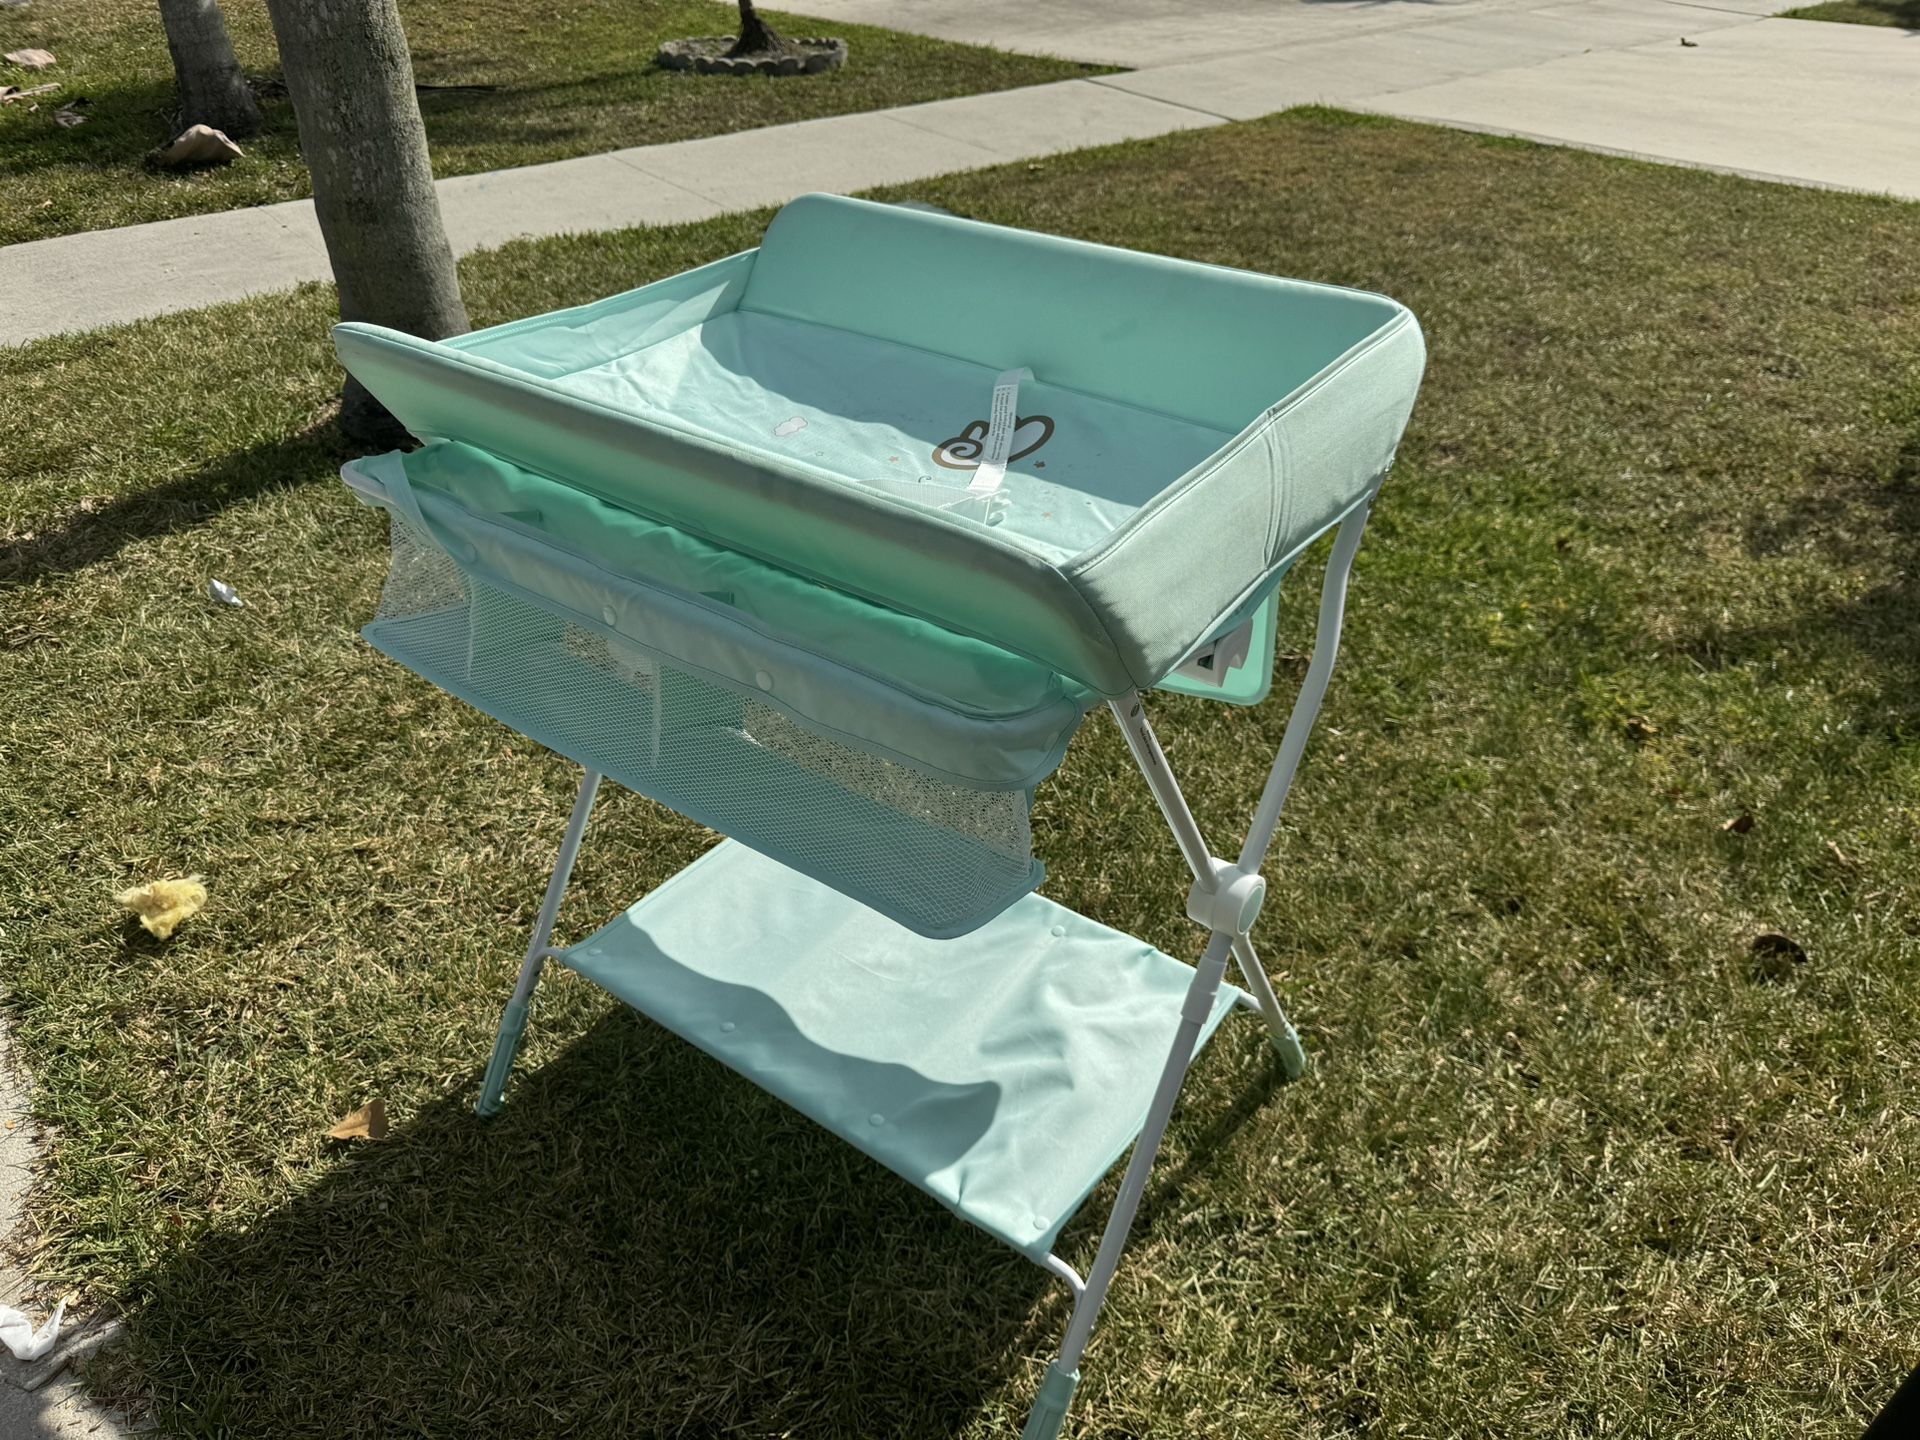 Changing Table Portable Folding